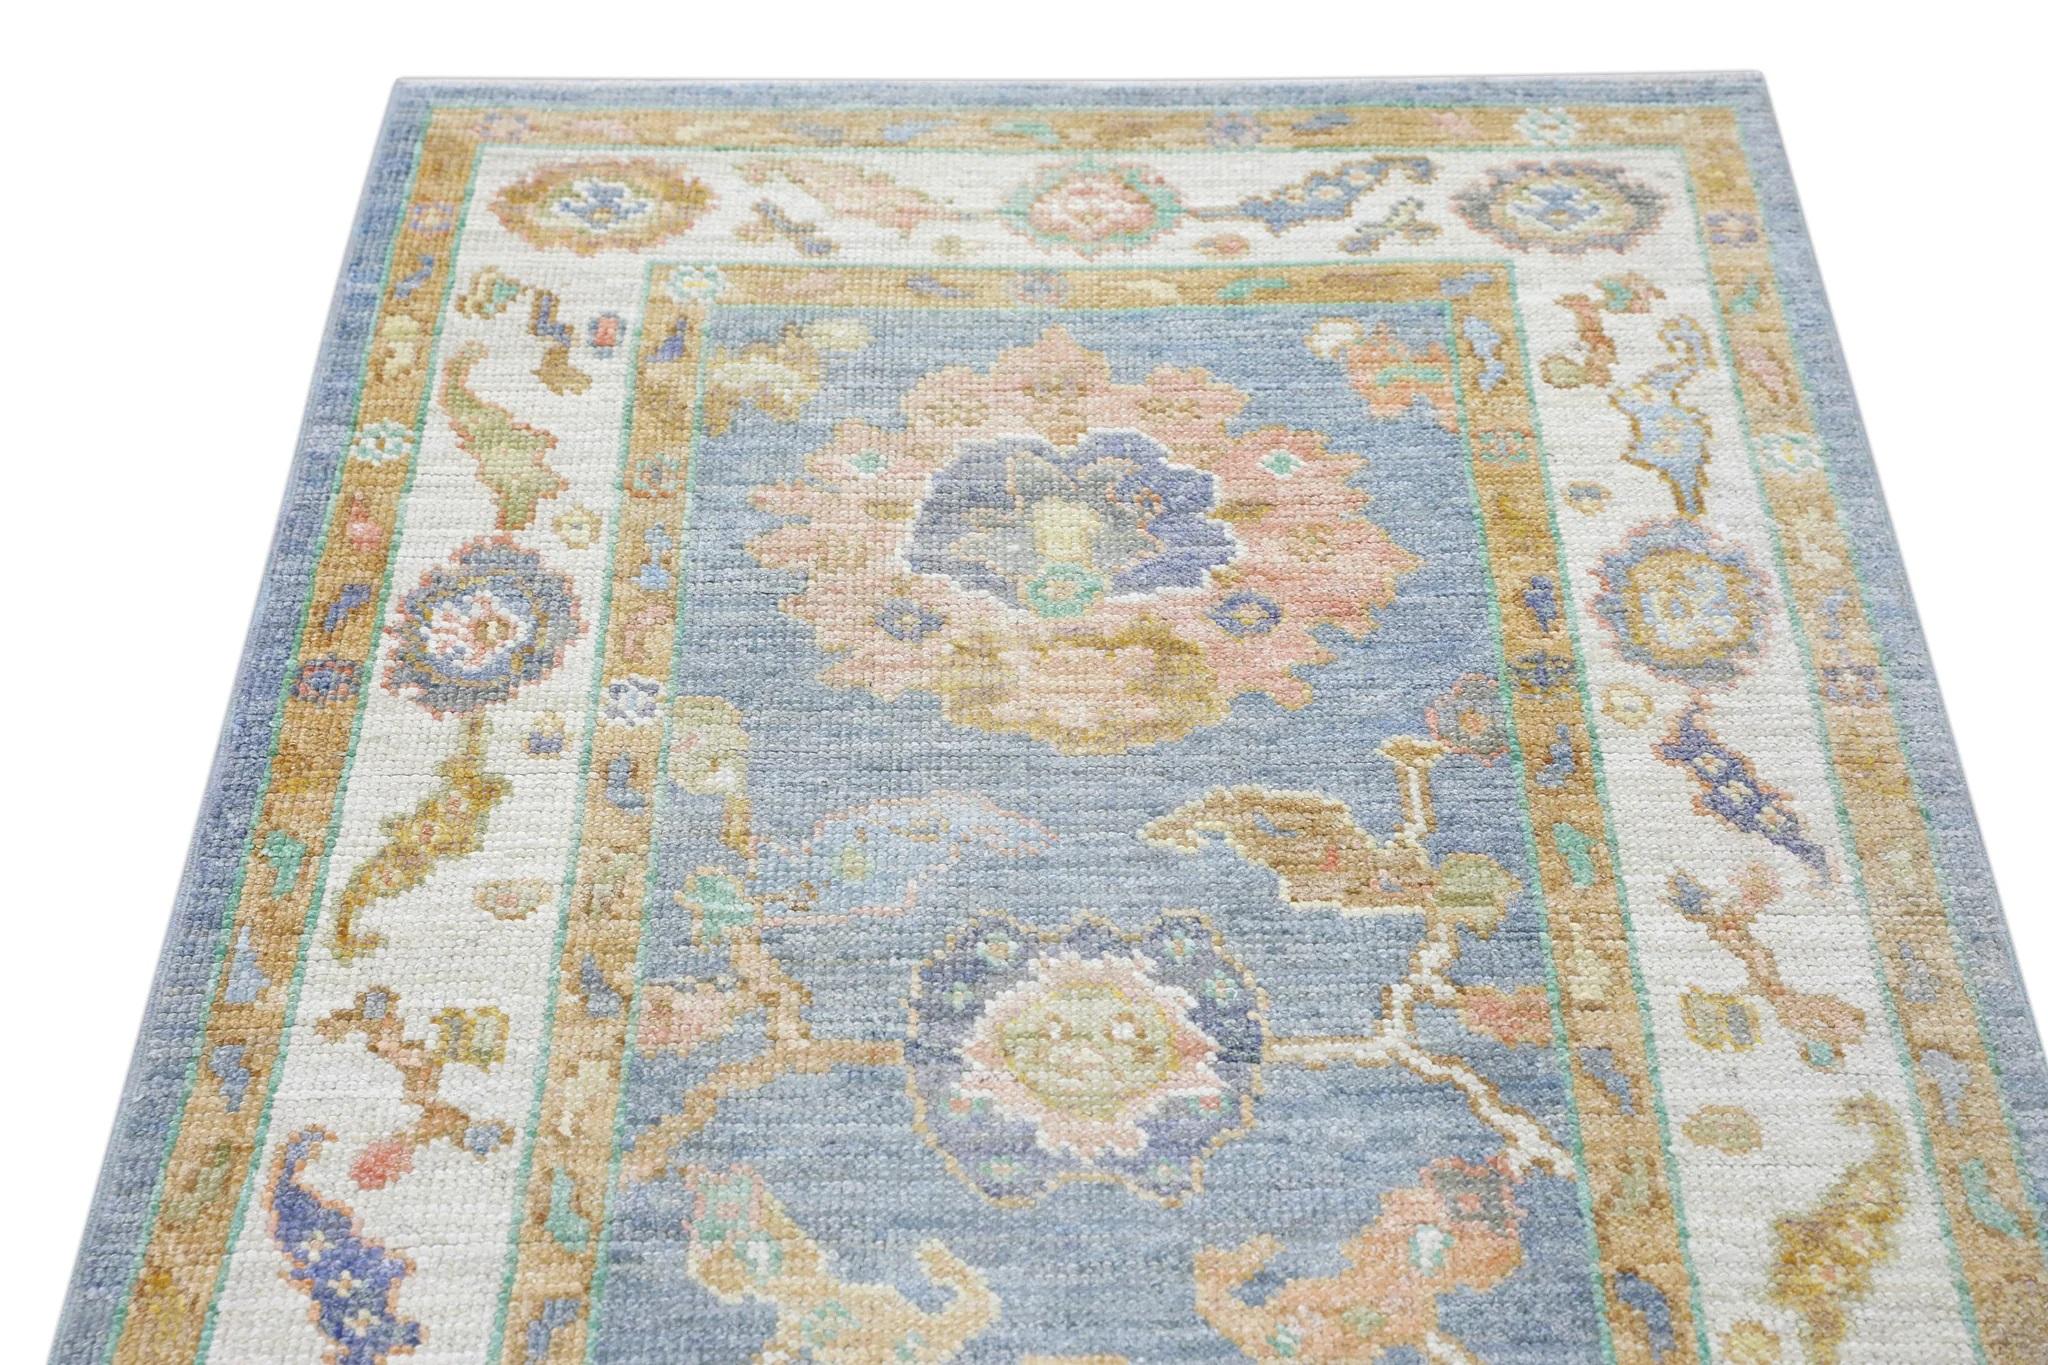 Floral Handwoven Wool Turkish Oushak Rug with Blue Field Yellow Border 2'11 X 5' For Sale 2